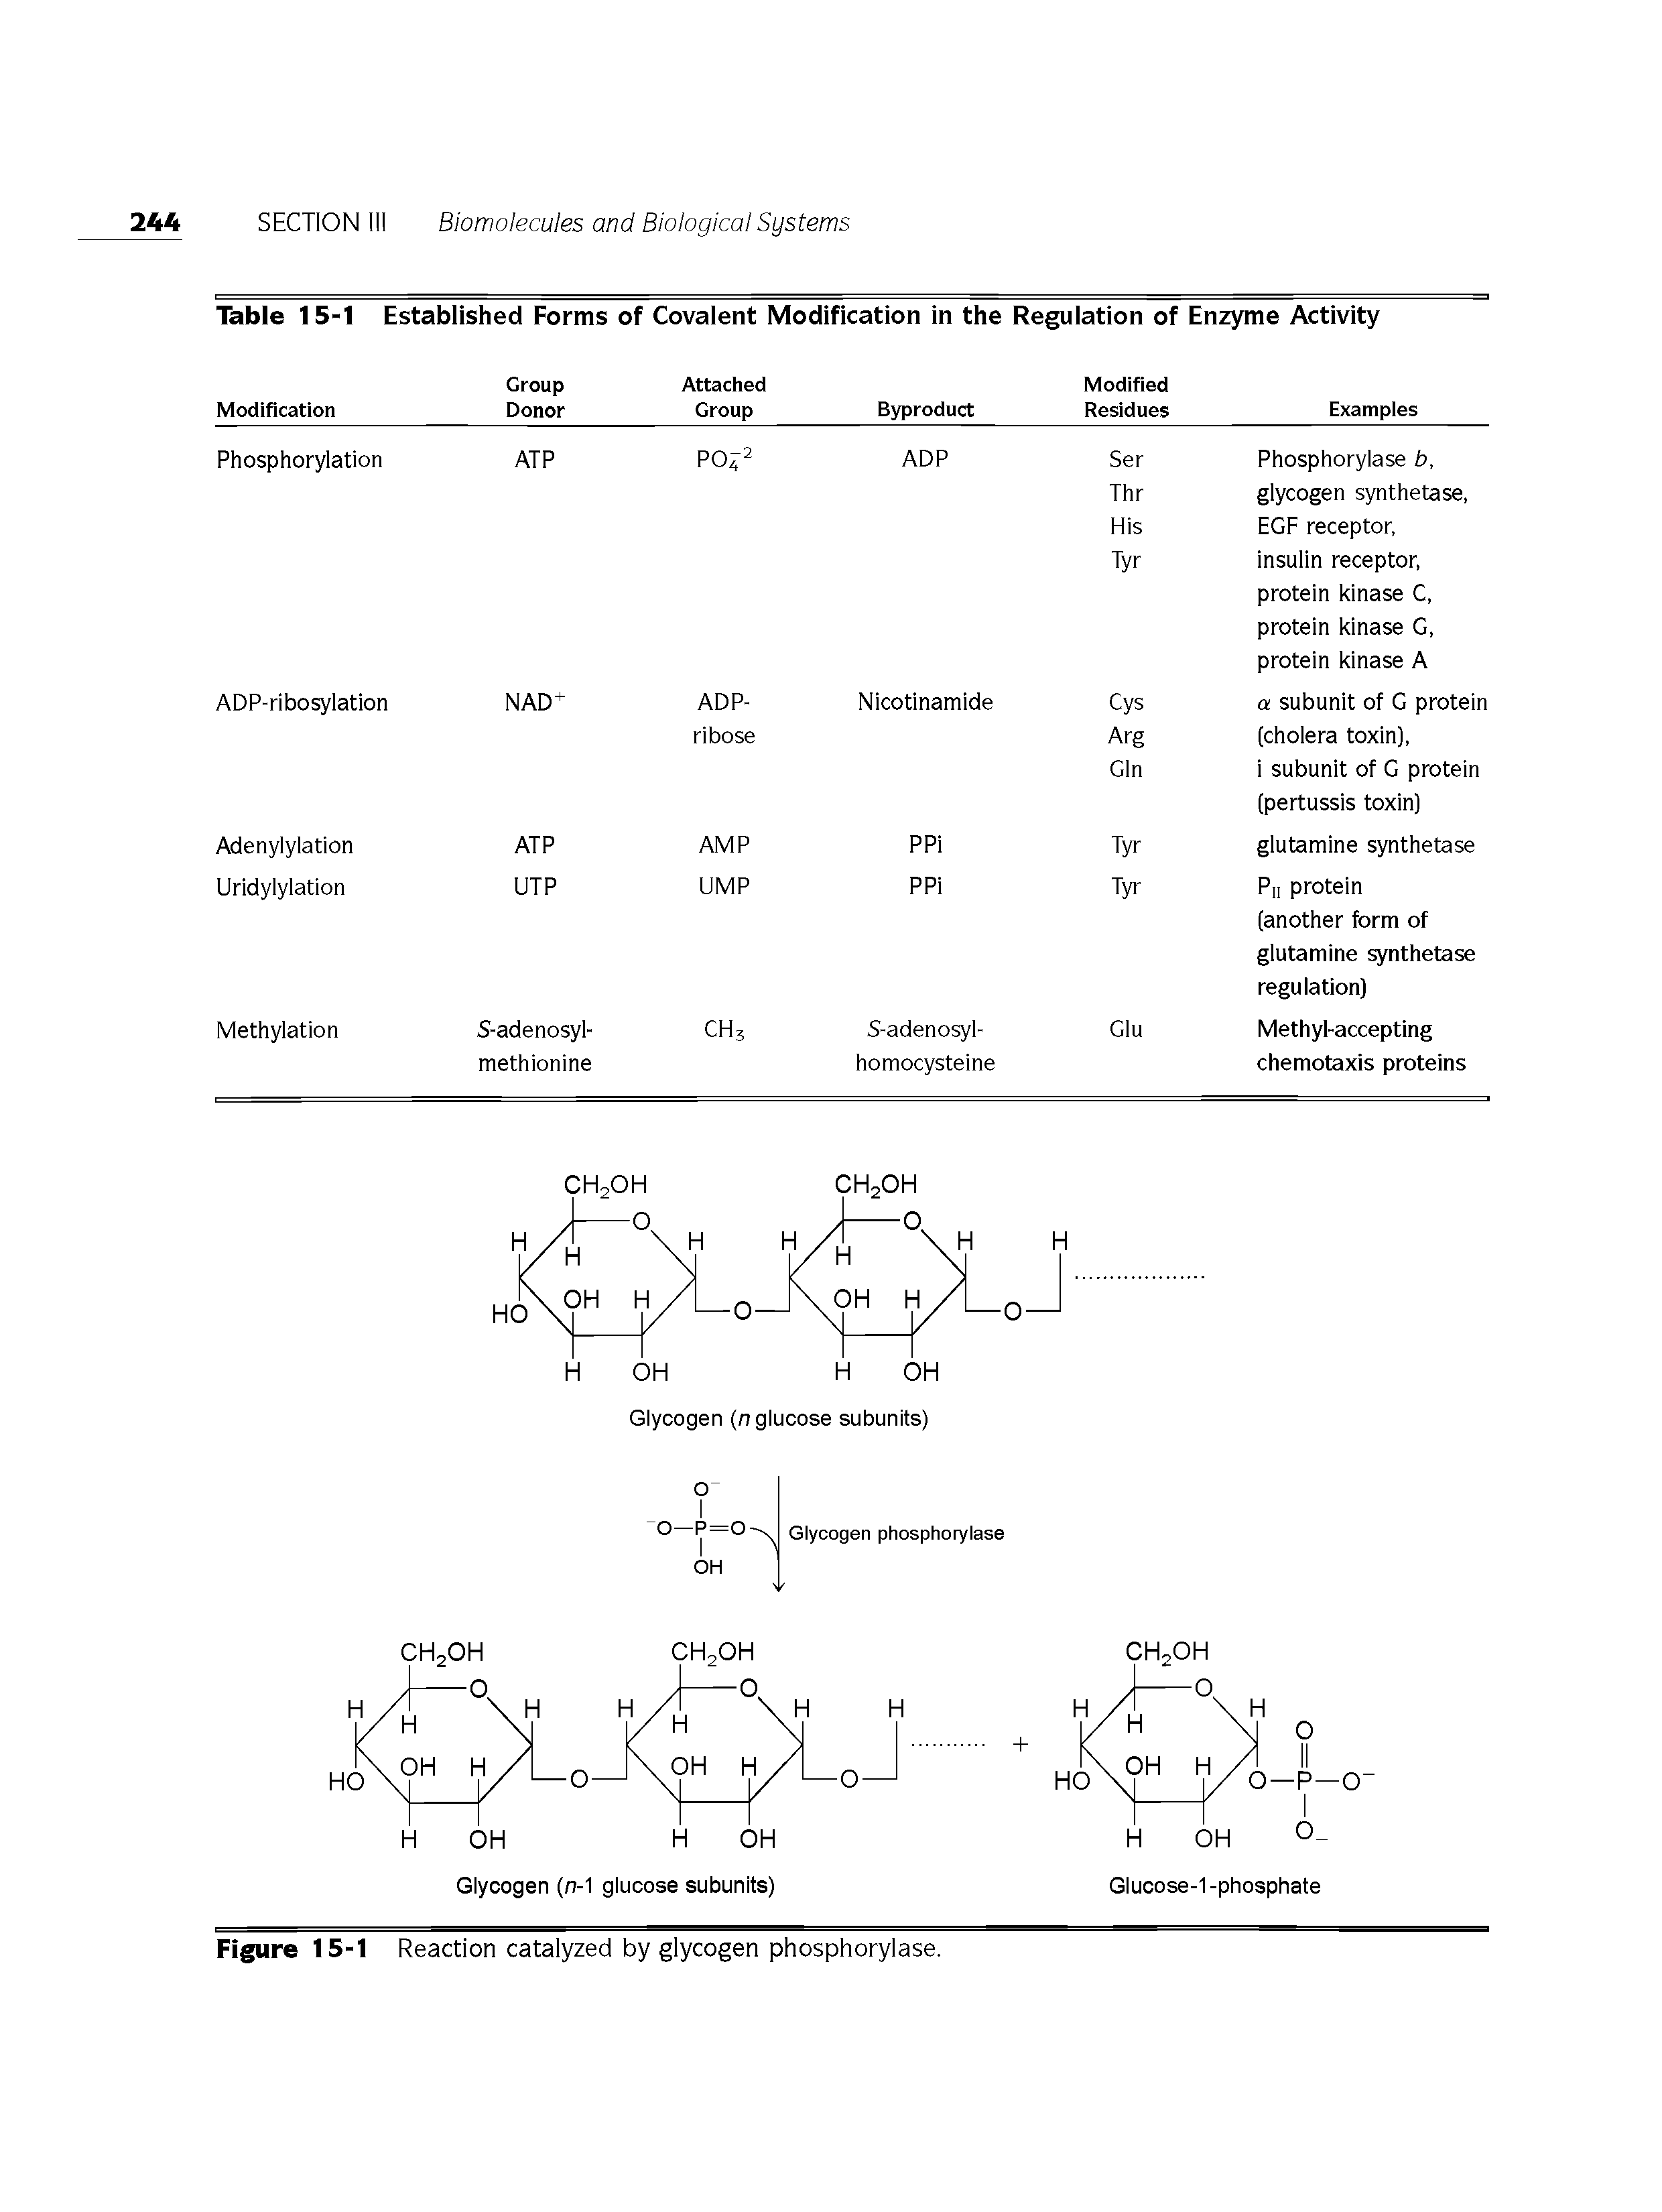 Table 15-1 Established Forms of Covalent Modification in the Regulation of Enzyme Activity...